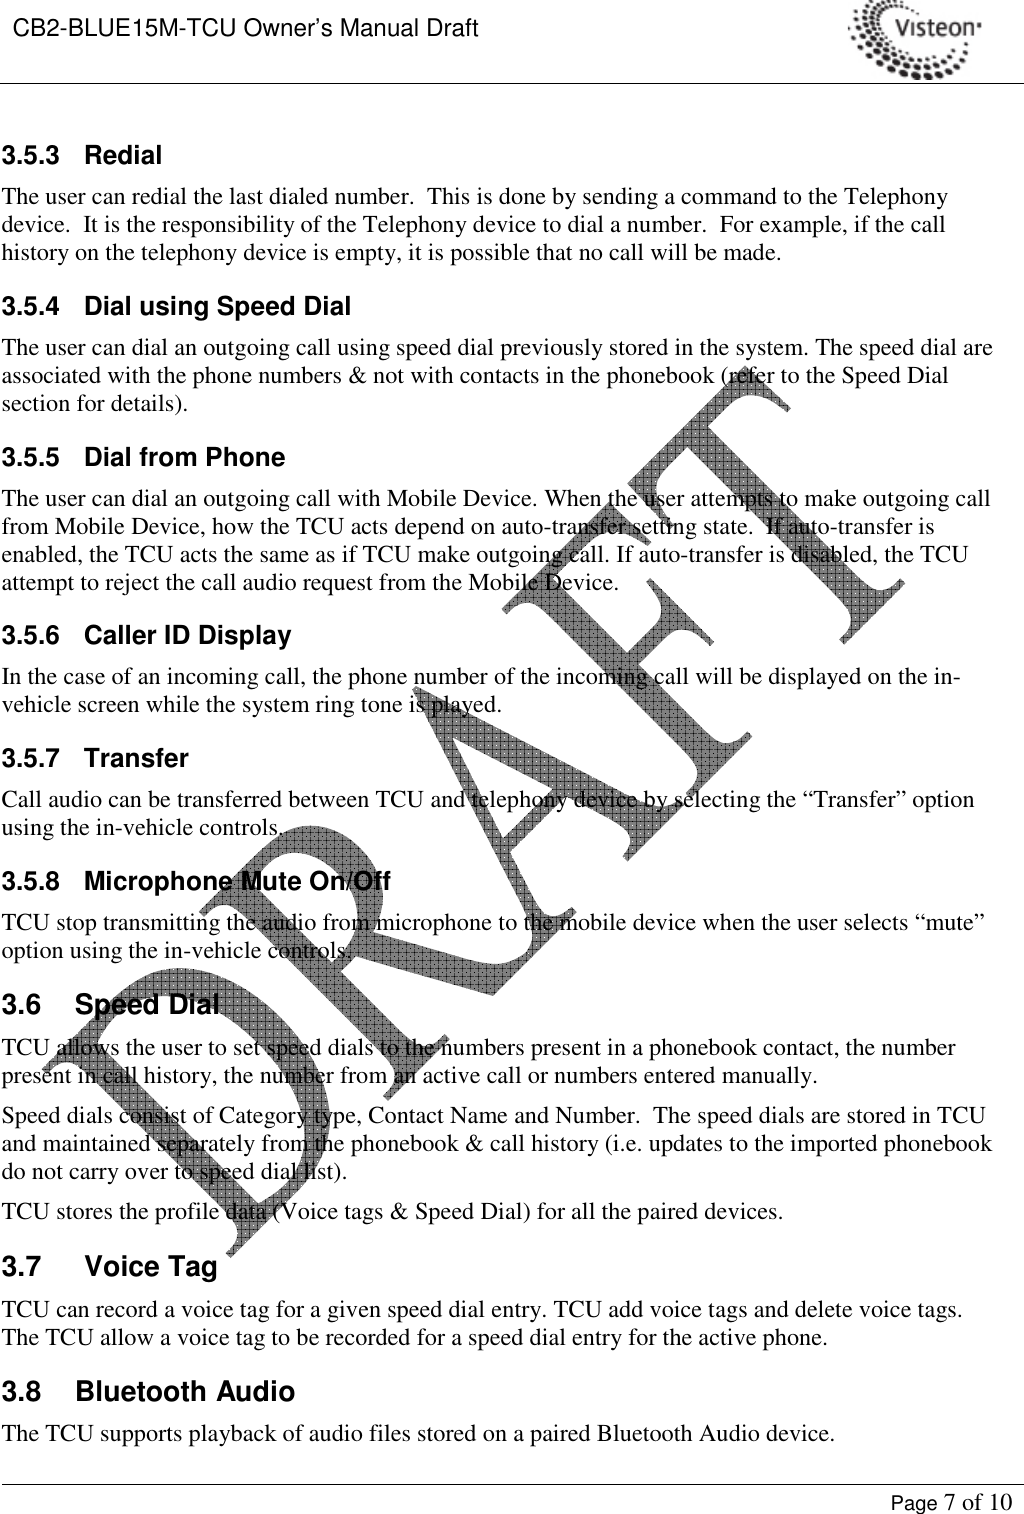 CB2-BLUE15M-TCU Owner’s Manual Draft     Page 7 of 10  3.5.3  Redial The user can redial the last dialed number.  This is done by sending a command to the Telephony device.  It is the responsibility of the Telephony device to dial a number.  For example, if the call history on the telephony device is empty, it is possible that no call will be made. 3.5.4  Dial using Speed Dial The user can dial an outgoing call using speed dial previously stored in the system. The speed dial are associated with the phone numbers &amp; not with contacts in the phonebook (refer to the Speed Dial section for details). 3.5.5  Dial from Phone The user can dial an outgoing call with Mobile Device. When the user attempts to make outgoing call from Mobile Device, how the TCU acts depend on auto-transfer setting state.  If auto-transfer is enabled, the TCU acts the same as if TCU make outgoing call. If auto-transfer is disabled, the TCU attempt to reject the call audio request from the Mobile Device. 3.5.6  Caller ID Display In the case of an incoming call, the phone number of the incoming call will be displayed on the in-vehicle screen while the system ring tone is played. 3.5.7  Transfer Call audio can be transferred between TCU and telephony device by selecting the “Transfer” option using the in-vehicle controls. 3.5.8  Microphone Mute On/Off TCU stop transmitting the audio from microphone to the mobile device when the user selects “mute” option using the in-vehicle controls. 3.6  Speed Dial TCU allows the user to set speed dials to the numbers present in a phonebook contact, the number present in call history, the number from an active call or numbers entered manually. Speed dials consist of Category type, Contact Name and Number.  The speed dials are stored in TCU and maintained separately from the phonebook &amp; call history (i.e. updates to the imported phonebook do not carry over to speed dial list). TCU stores the profile data (Voice tags &amp; Speed Dial) for all the paired devices.   3.7  Voice Tag TCU can record a voice tag for a given speed dial entry. TCU add voice tags and delete voice tags. The TCU allow a voice tag to be recorded for a speed dial entry for the active phone. 3.8  Bluetooth Audio The TCU supports playback of audio files stored on a paired Bluetooth Audio device.   